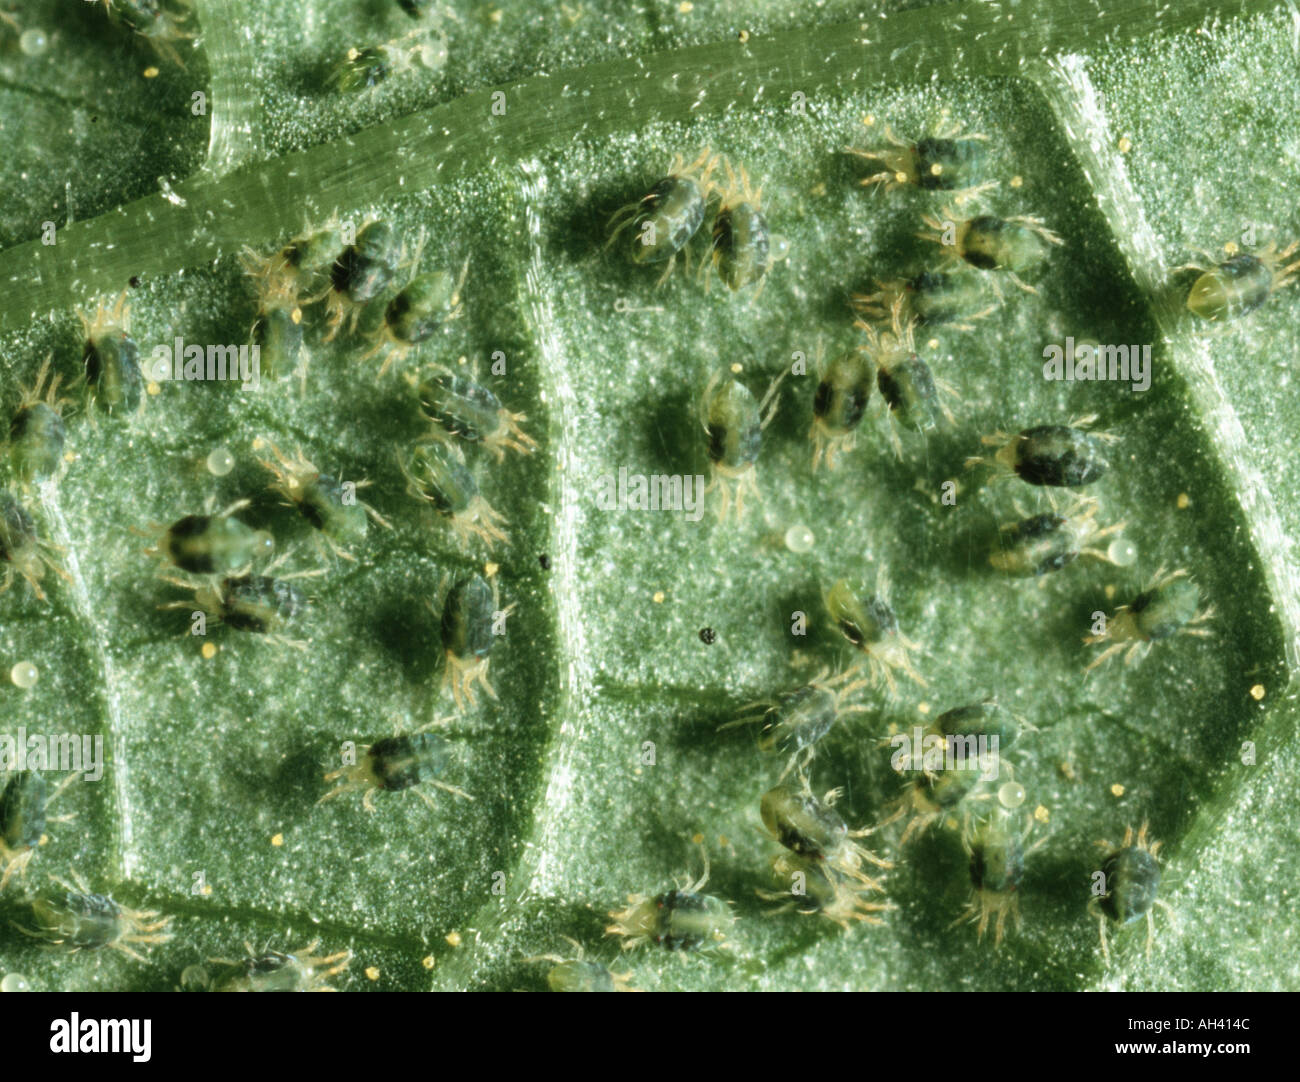 A colony of two spotted spider mites Tetranychus urticae adult eggs and immatures on leaf surface Stock Photo